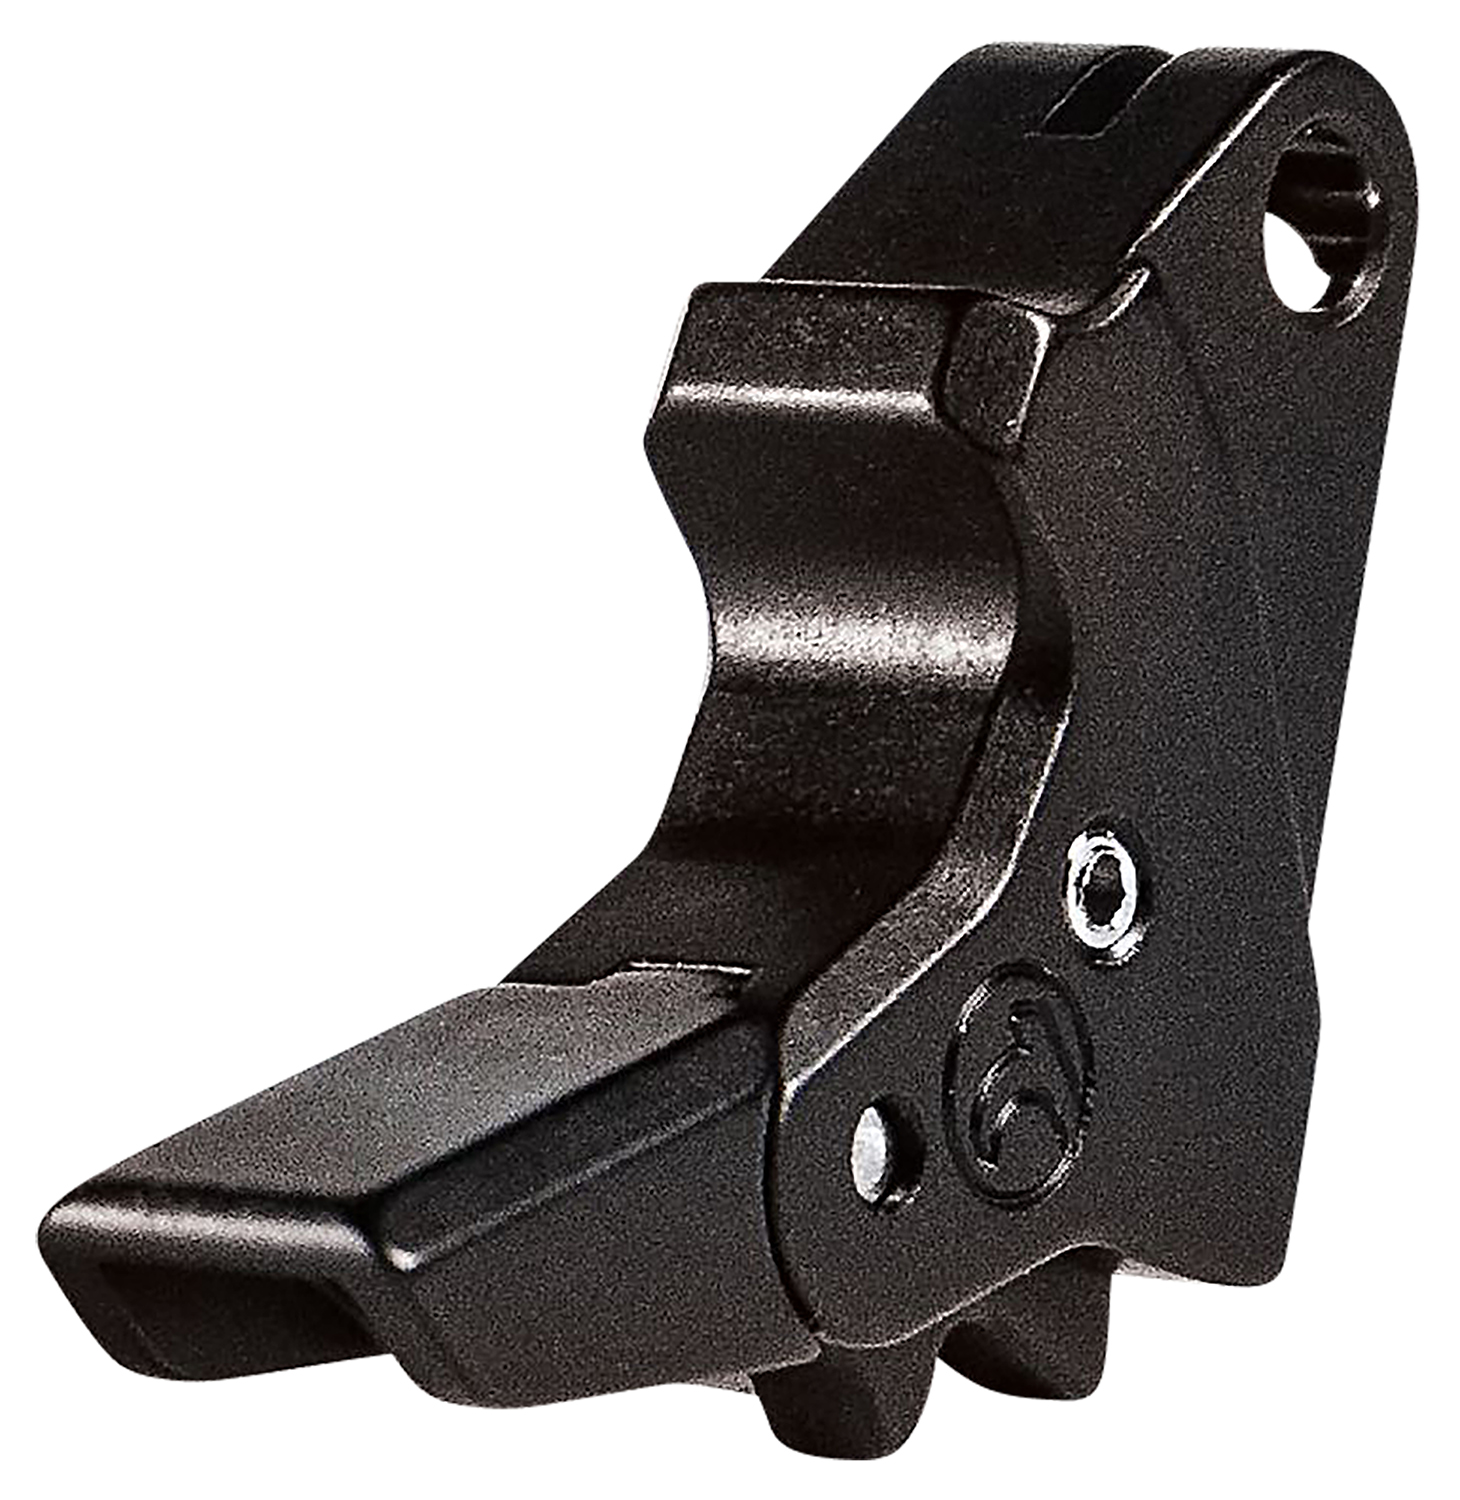 TIMNEY TRIGGER ALPHA COMPETITION S&W M&P 3LB PULL